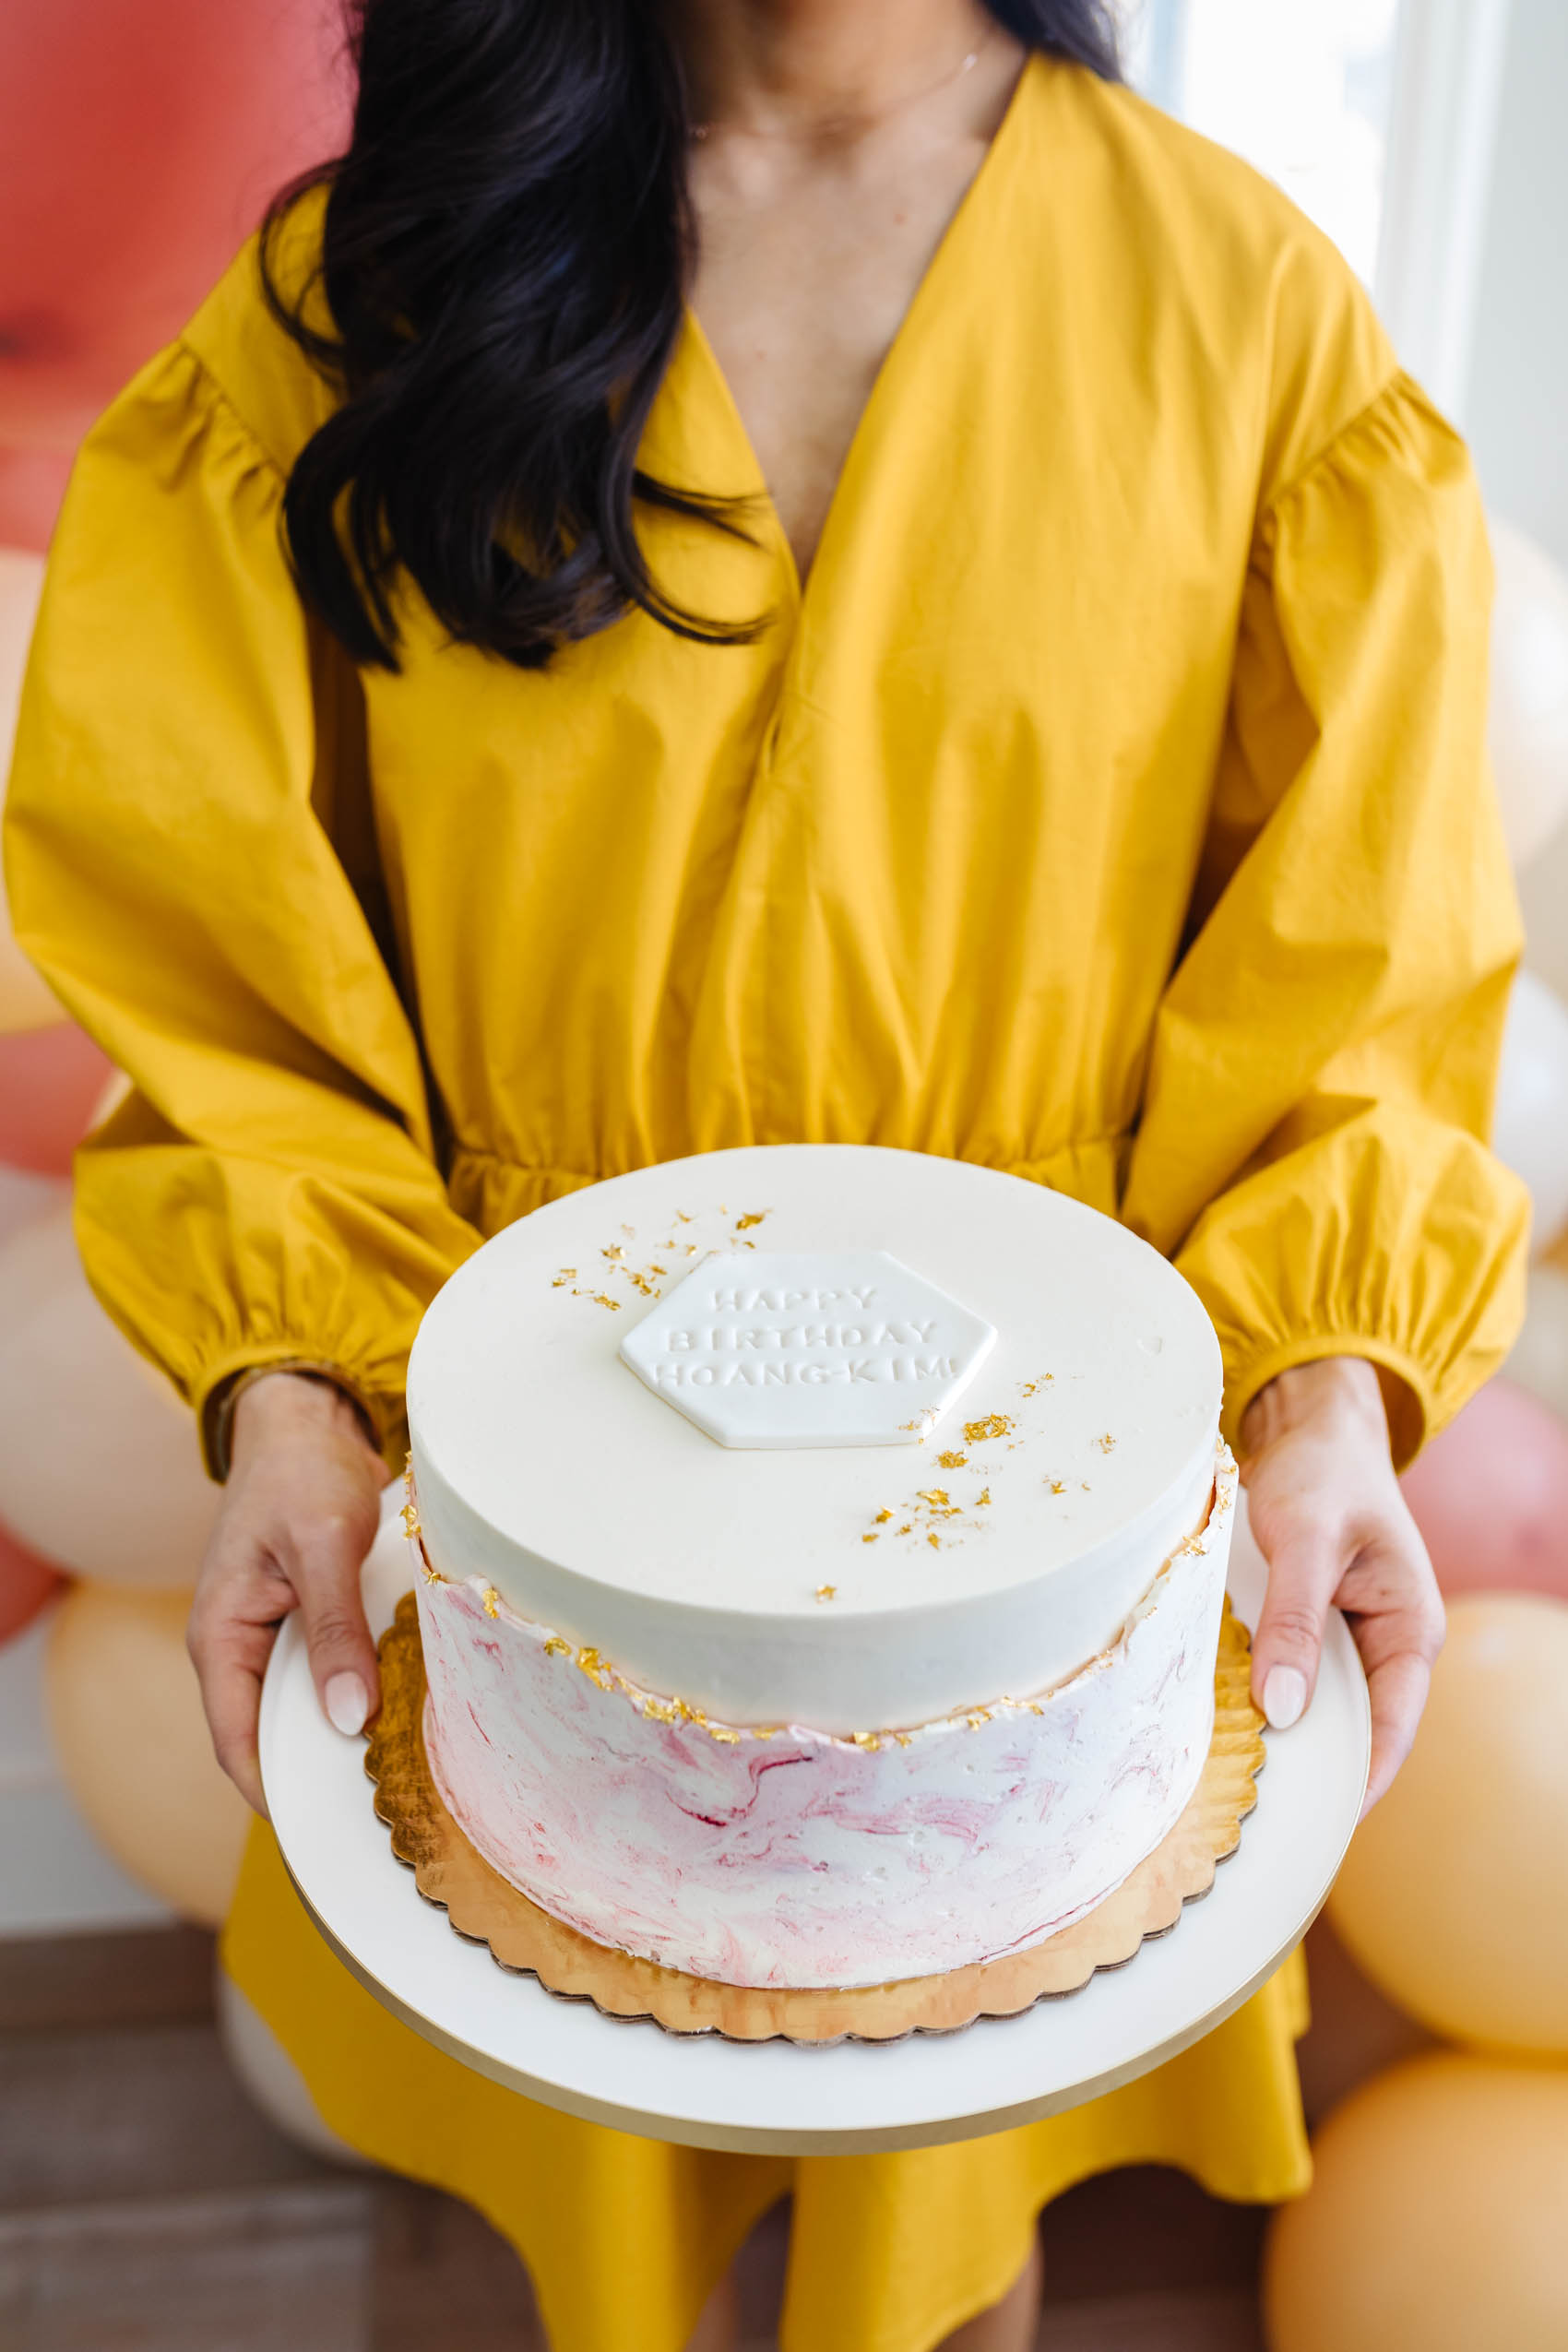 Hoang-Kim holds her 30th Birthday Cake from DFW Baker Crumb & Kettle. This is the vanilla cake with hazelnut buttercream with marble finish.